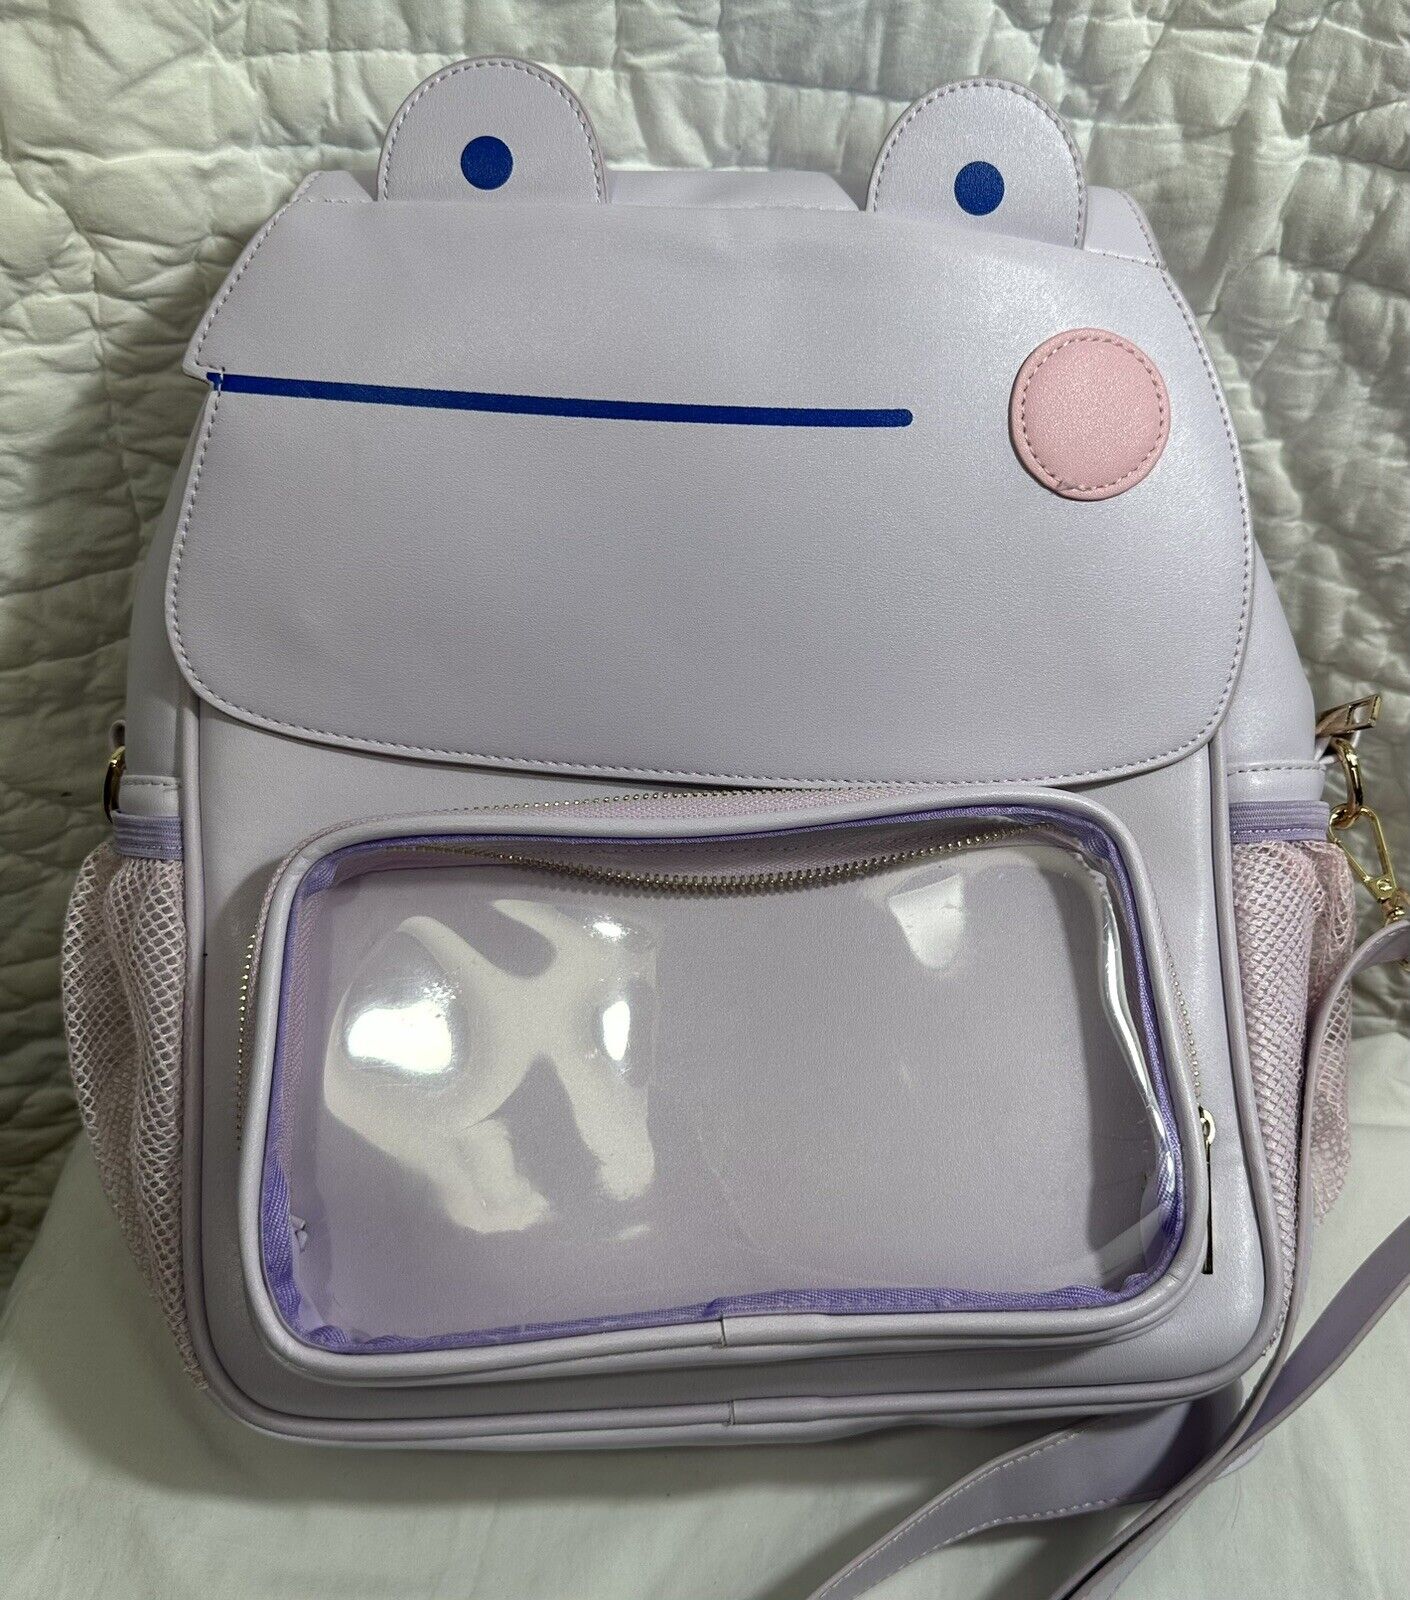 Rainylune Son The Frog Purse Backpack Convertible 13” Purple